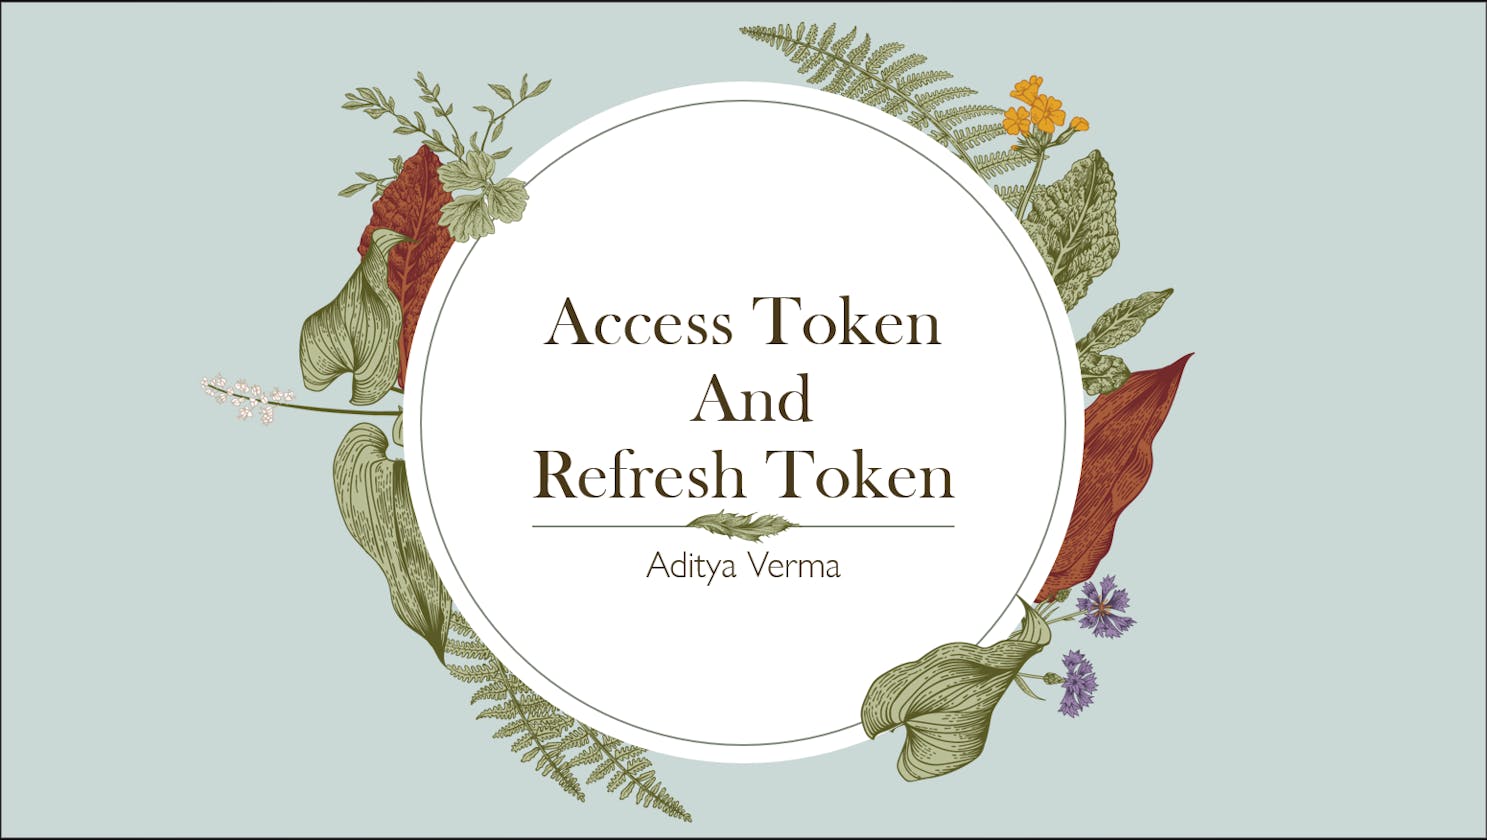 Access Tokens and Refresh Tokens